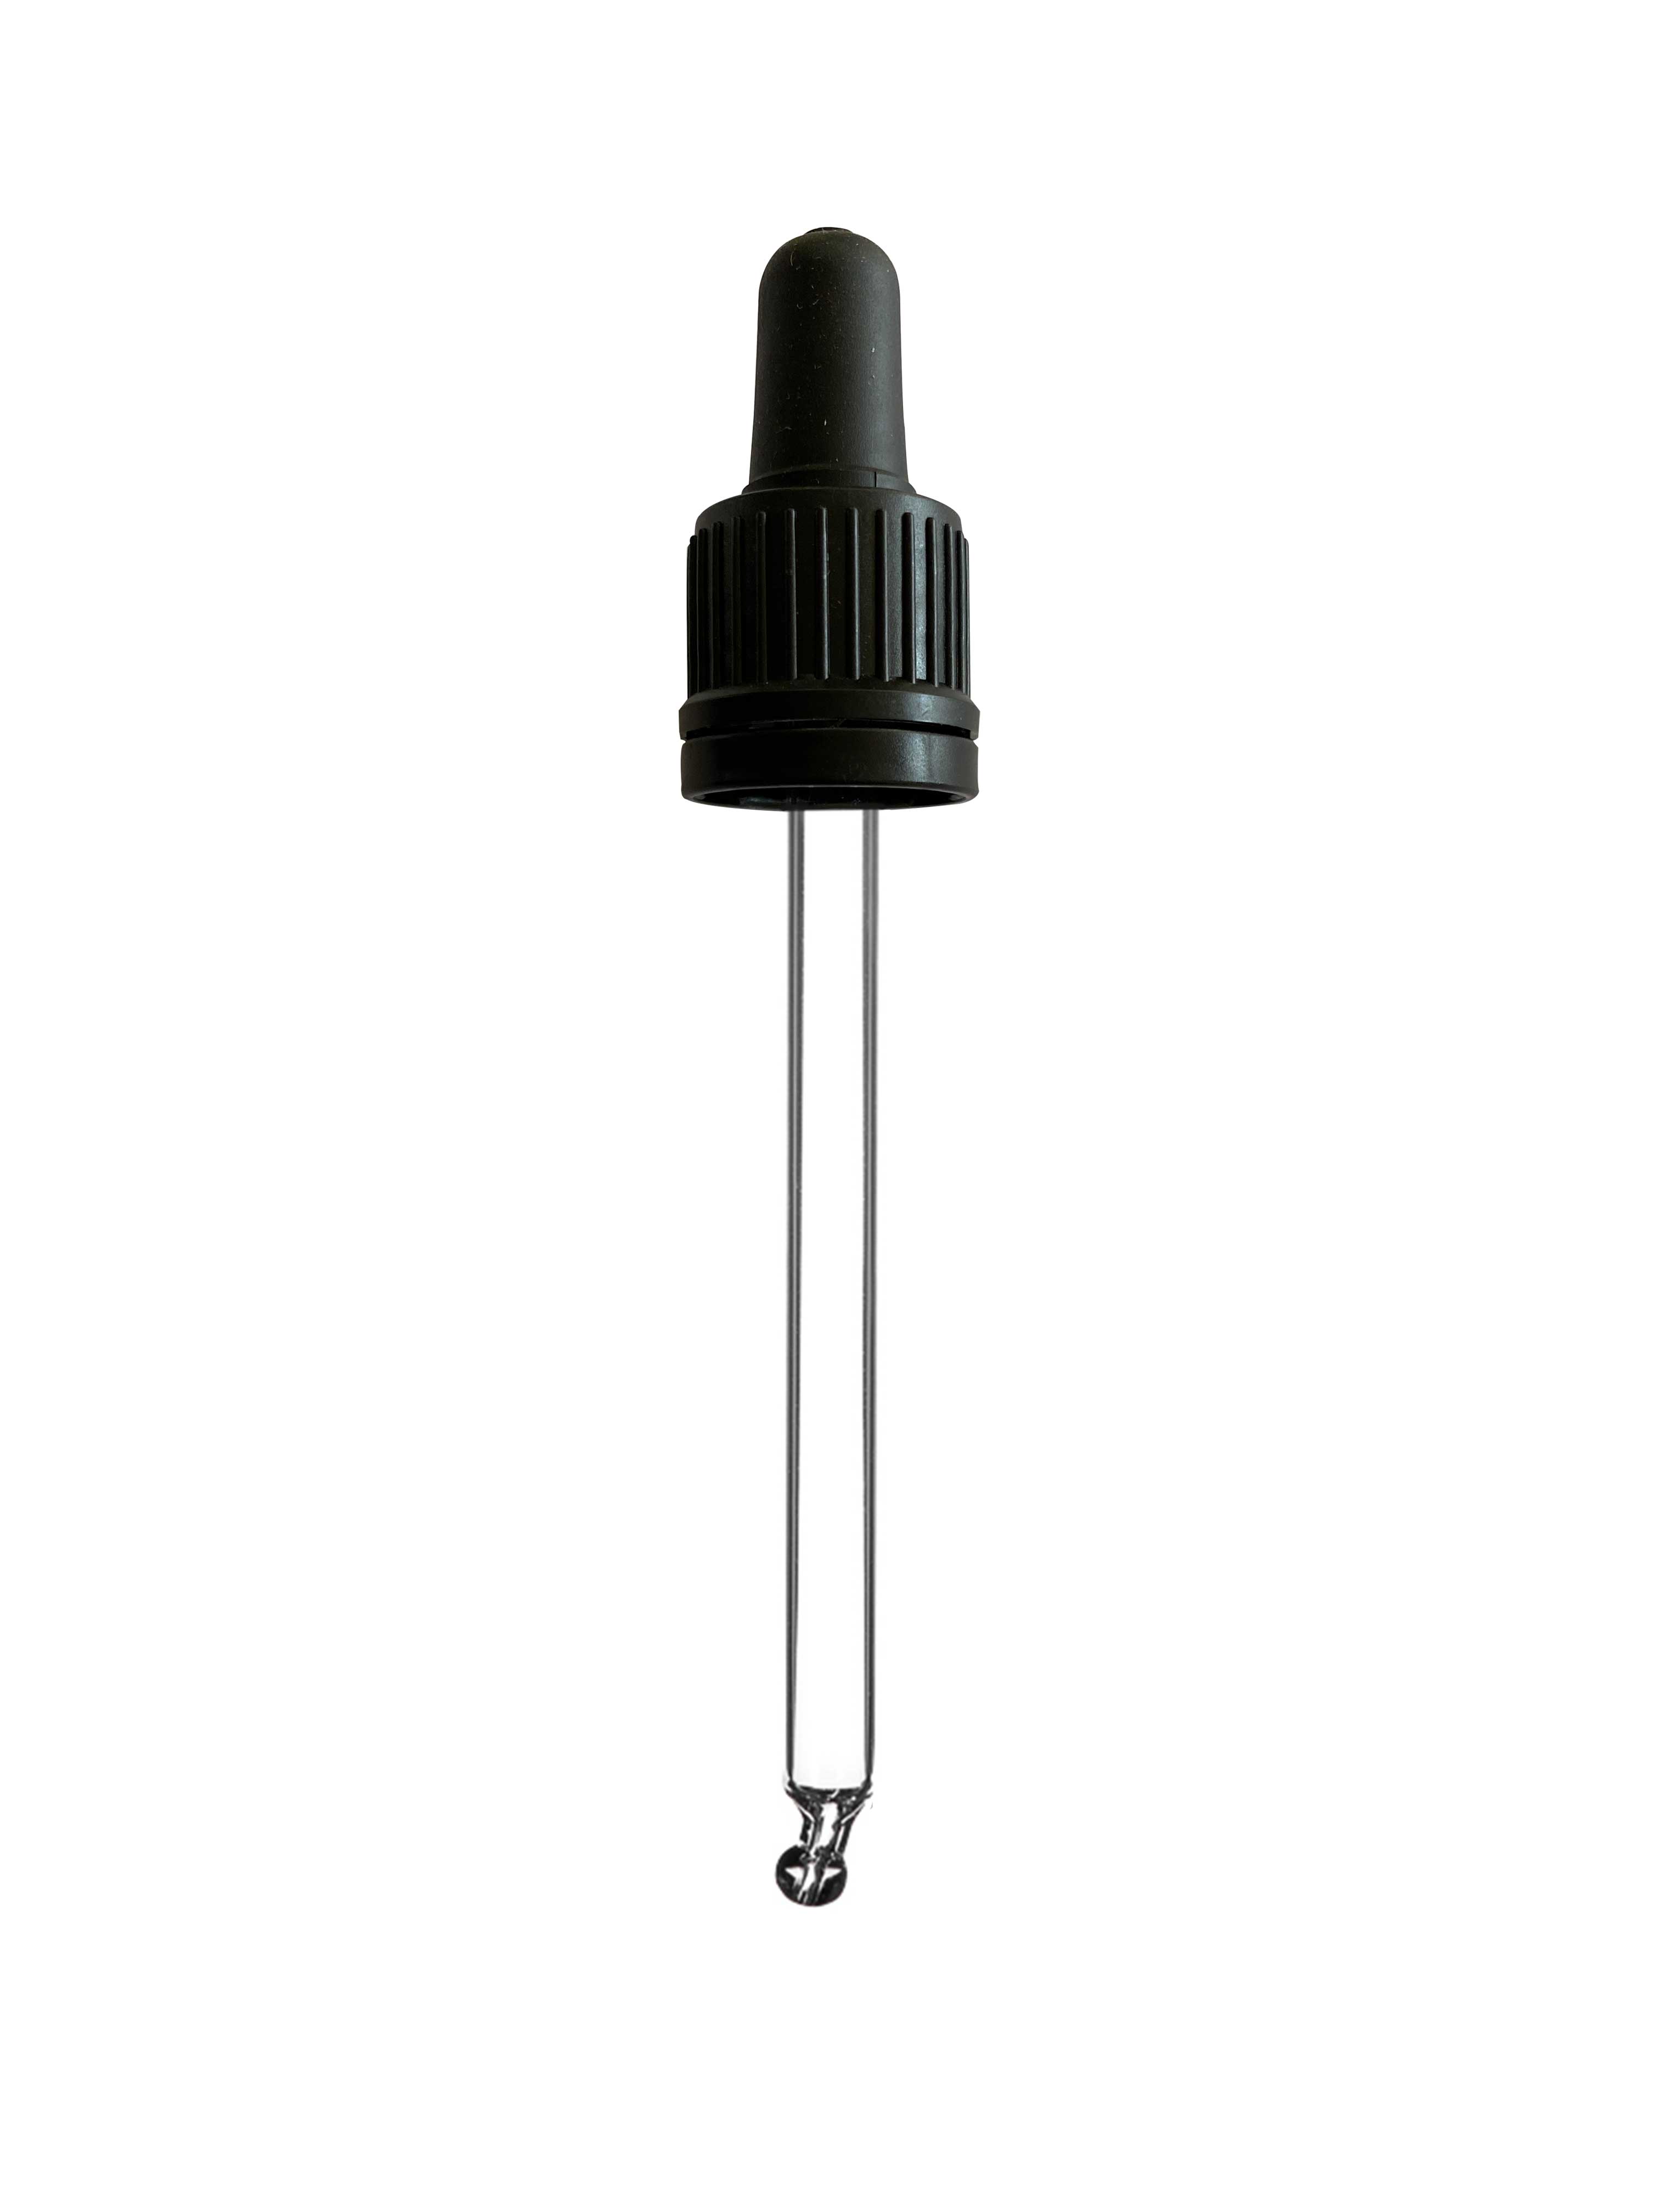 Pipette series II, DIN18, tamper-evident, PP, black, ribbed, black bulb TPE 0.7 ml, bent ball tip with 1.0 opening for Ginger 60 ml